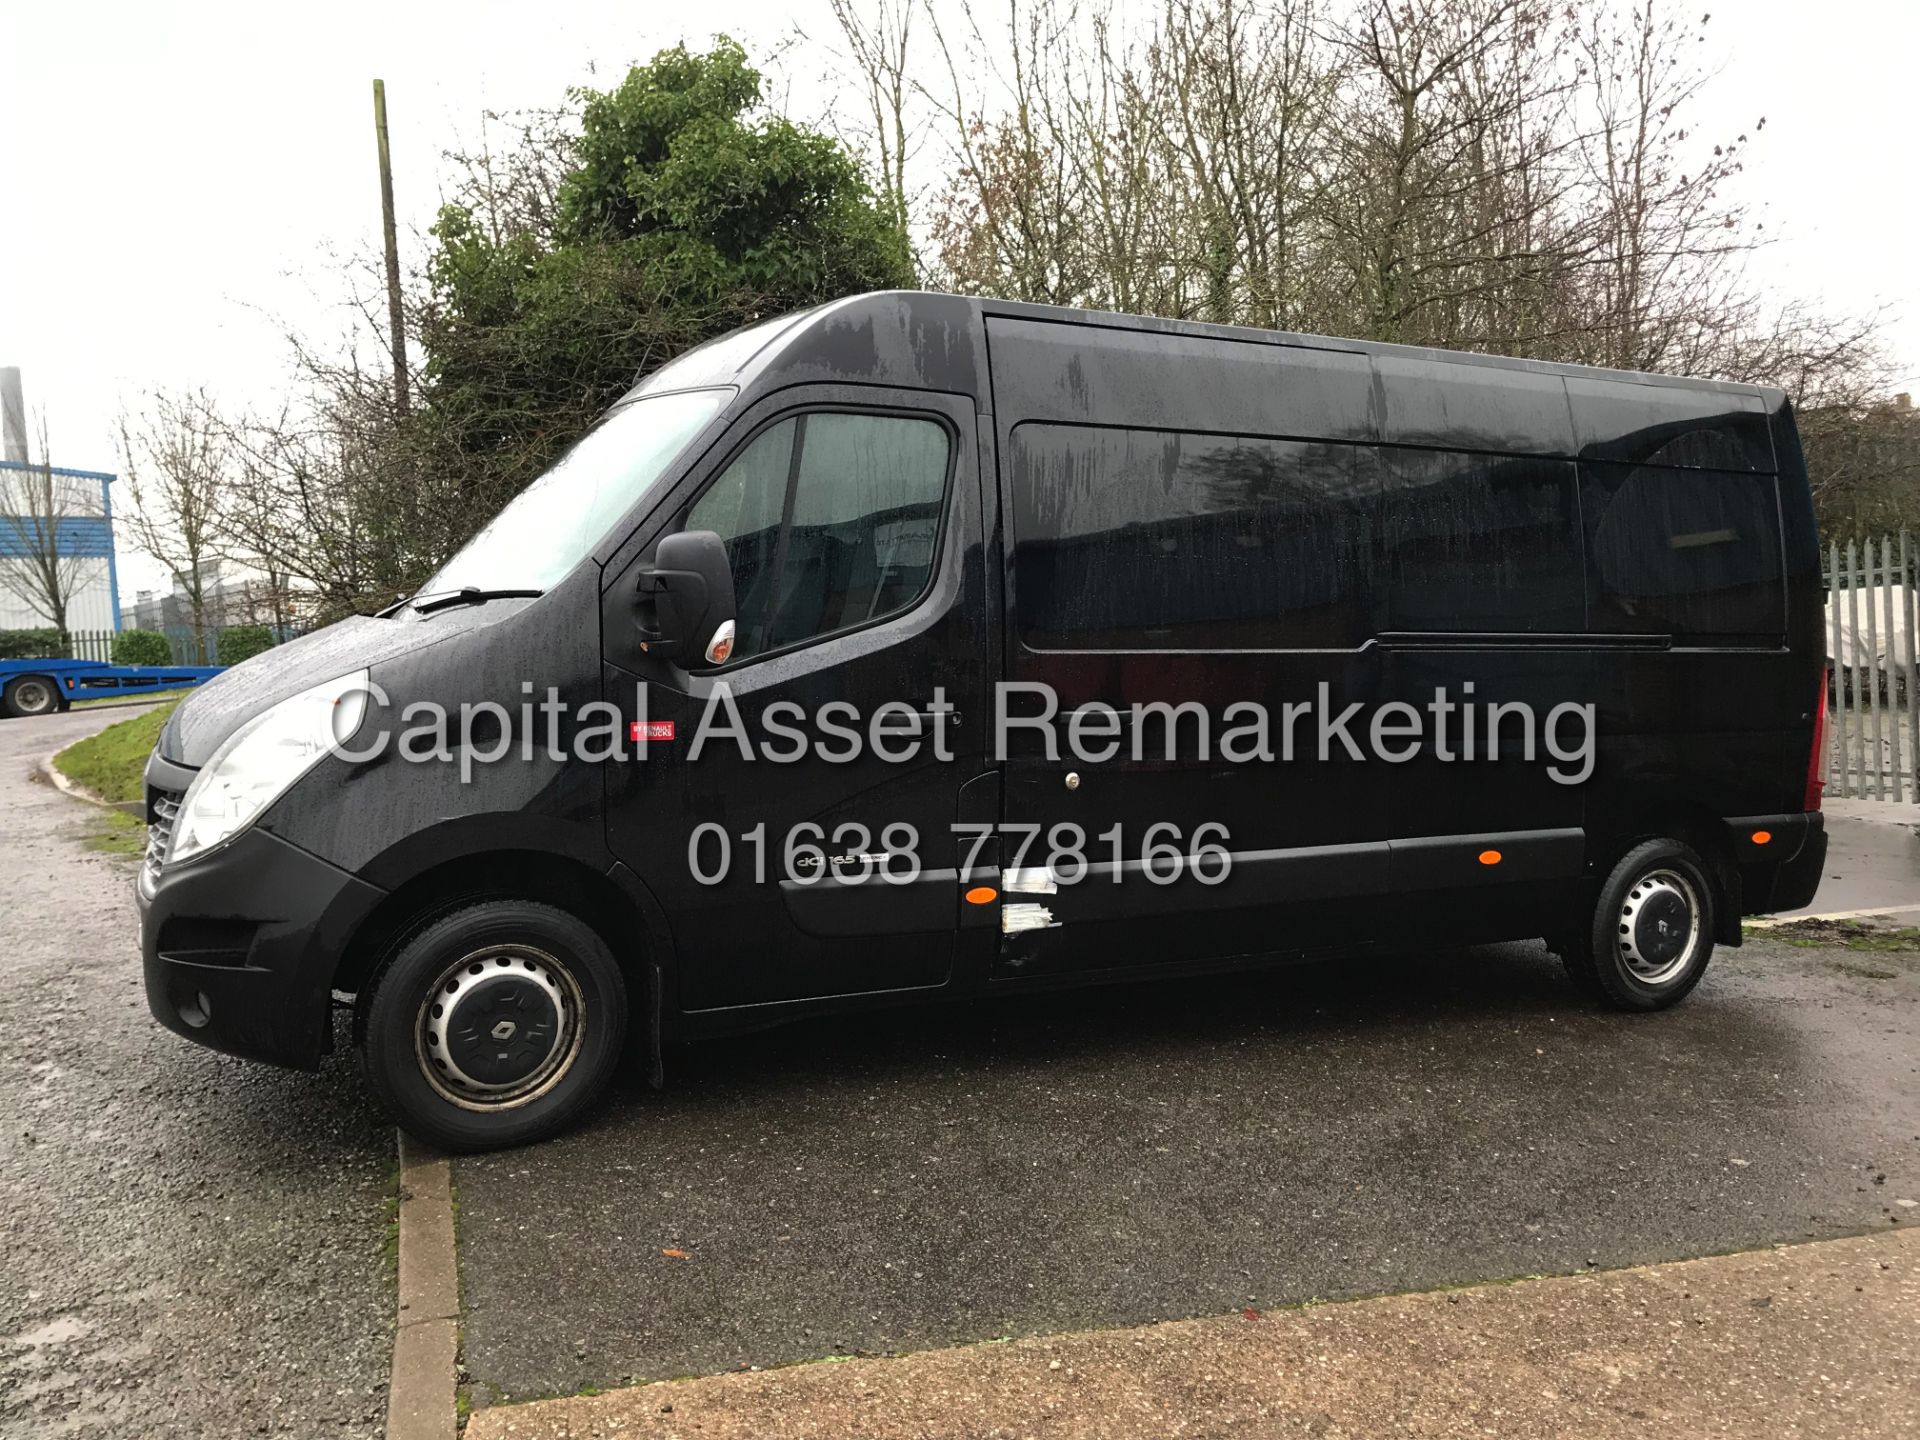 On Sale RENAULT MASTER 2.3DCI LM35 LWB (2015 MODEL) 1 OWNER - AIR CON -ELEC PACK *RARE 165BHP - - Image 3 of 12